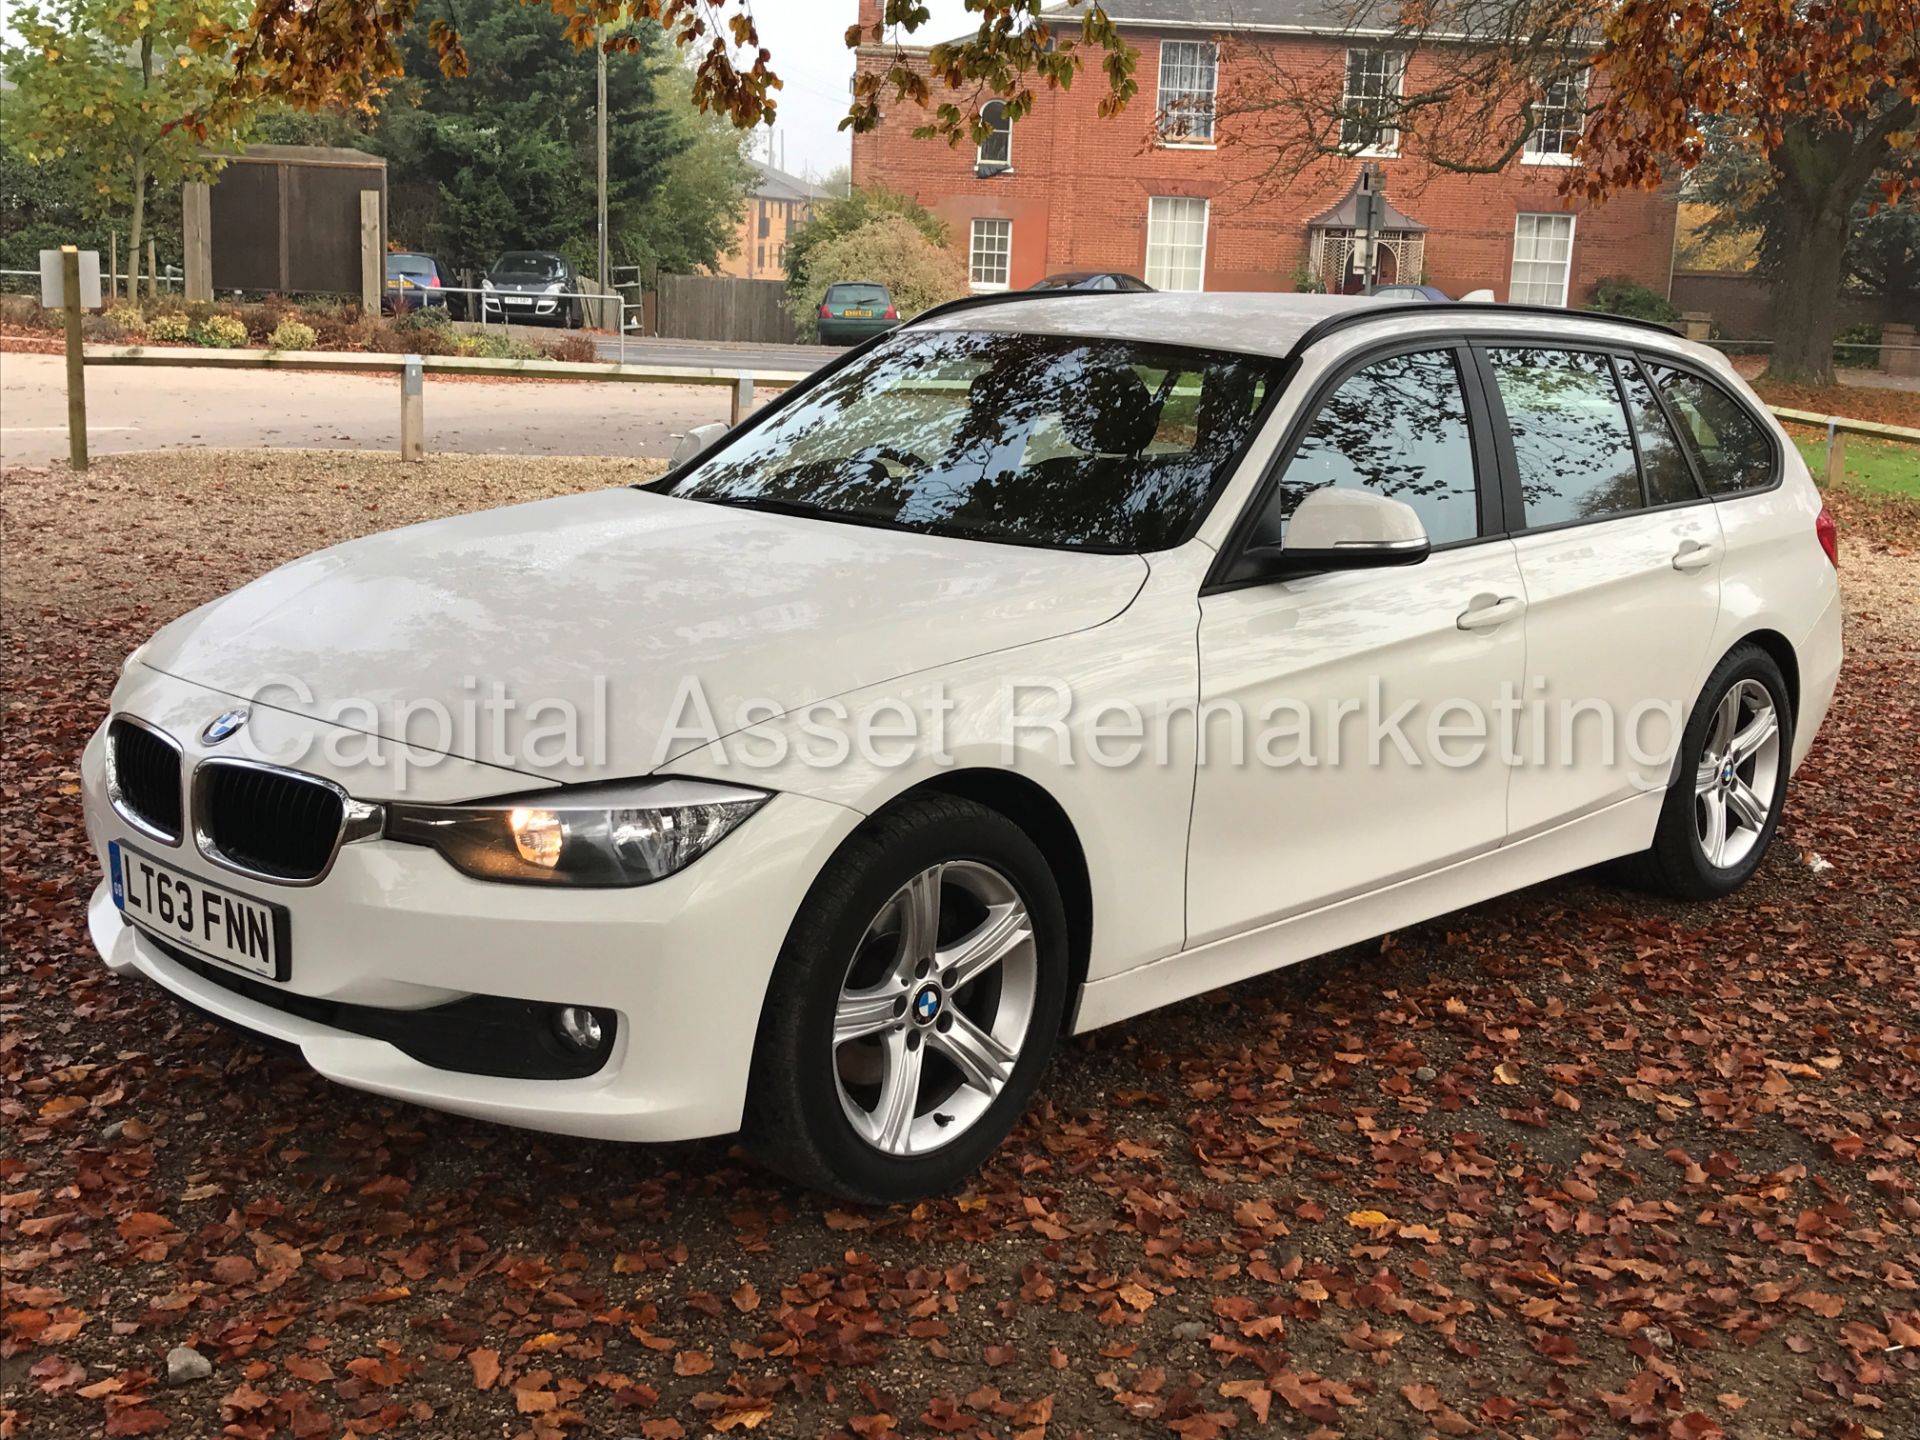 BMW 320d 'ESTATE / TOURING' (2014 MODEL) 8 SPEED AUTO - SAT NAV **FULLY LOADED** (1 OWNER FROM NEW)